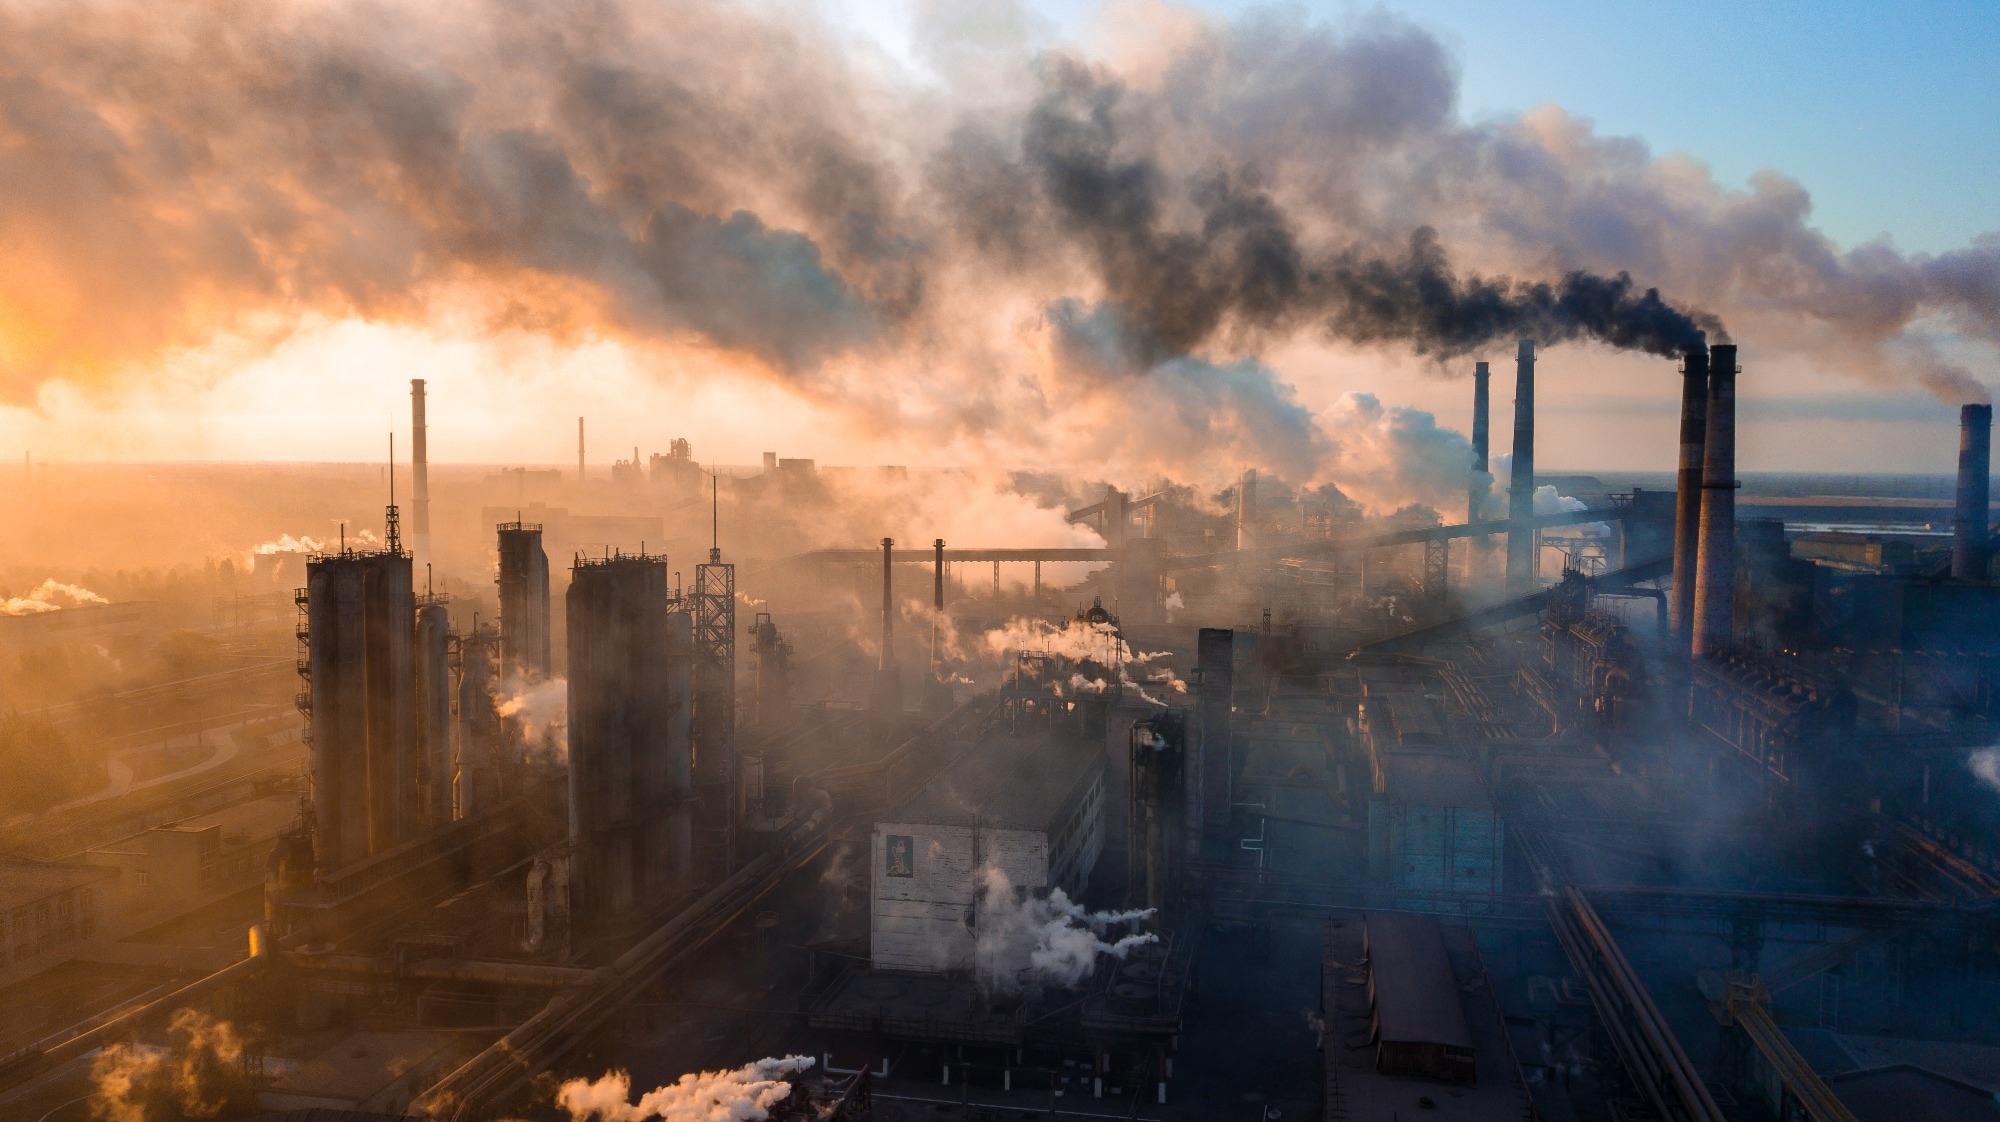 Study: Long-term air pollution exposure is associated with higher incidence of ST-elevation myocardial infarction and in-hospital cardiogenic shock. Image Credit: TR STOK/Shutterstock.com